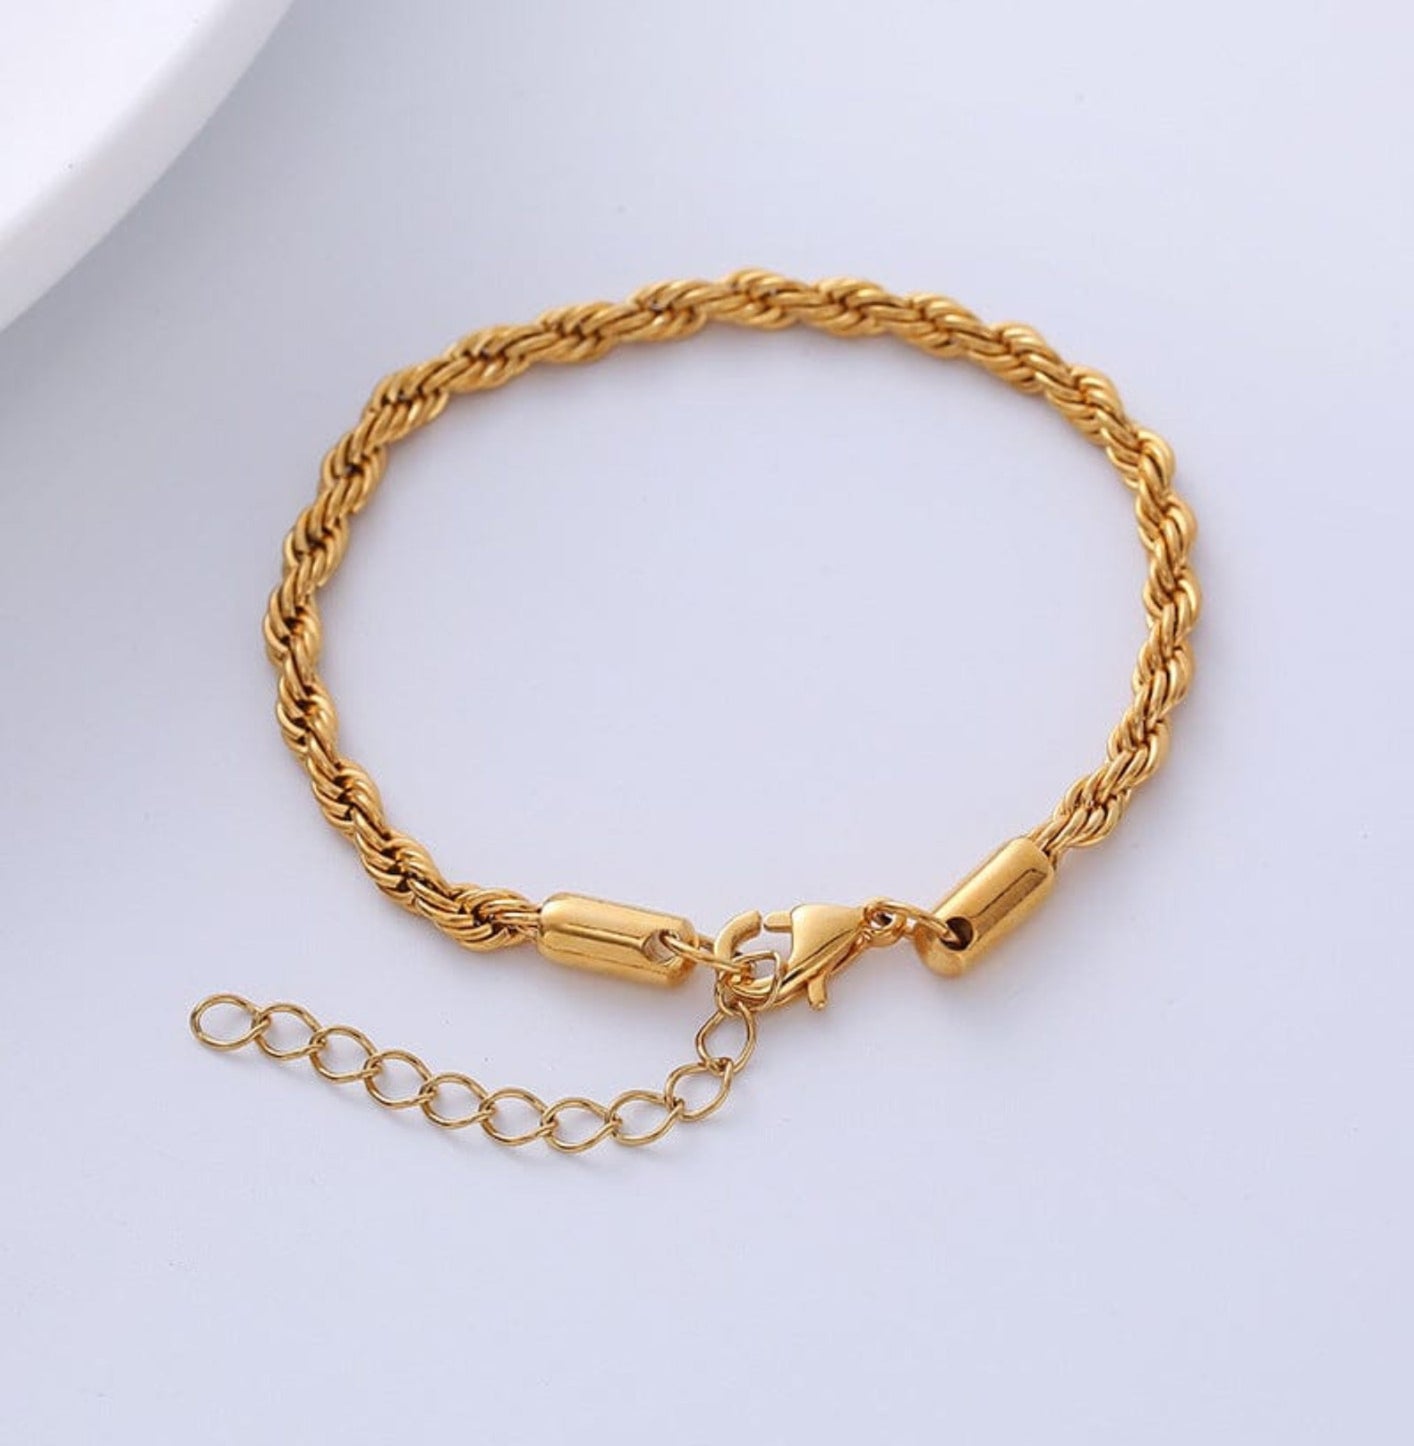 FOKATCHA BRACELET braclet Yubama Jewelry Online Store - The Elegant Designs of Gold and Silver ! Gold 